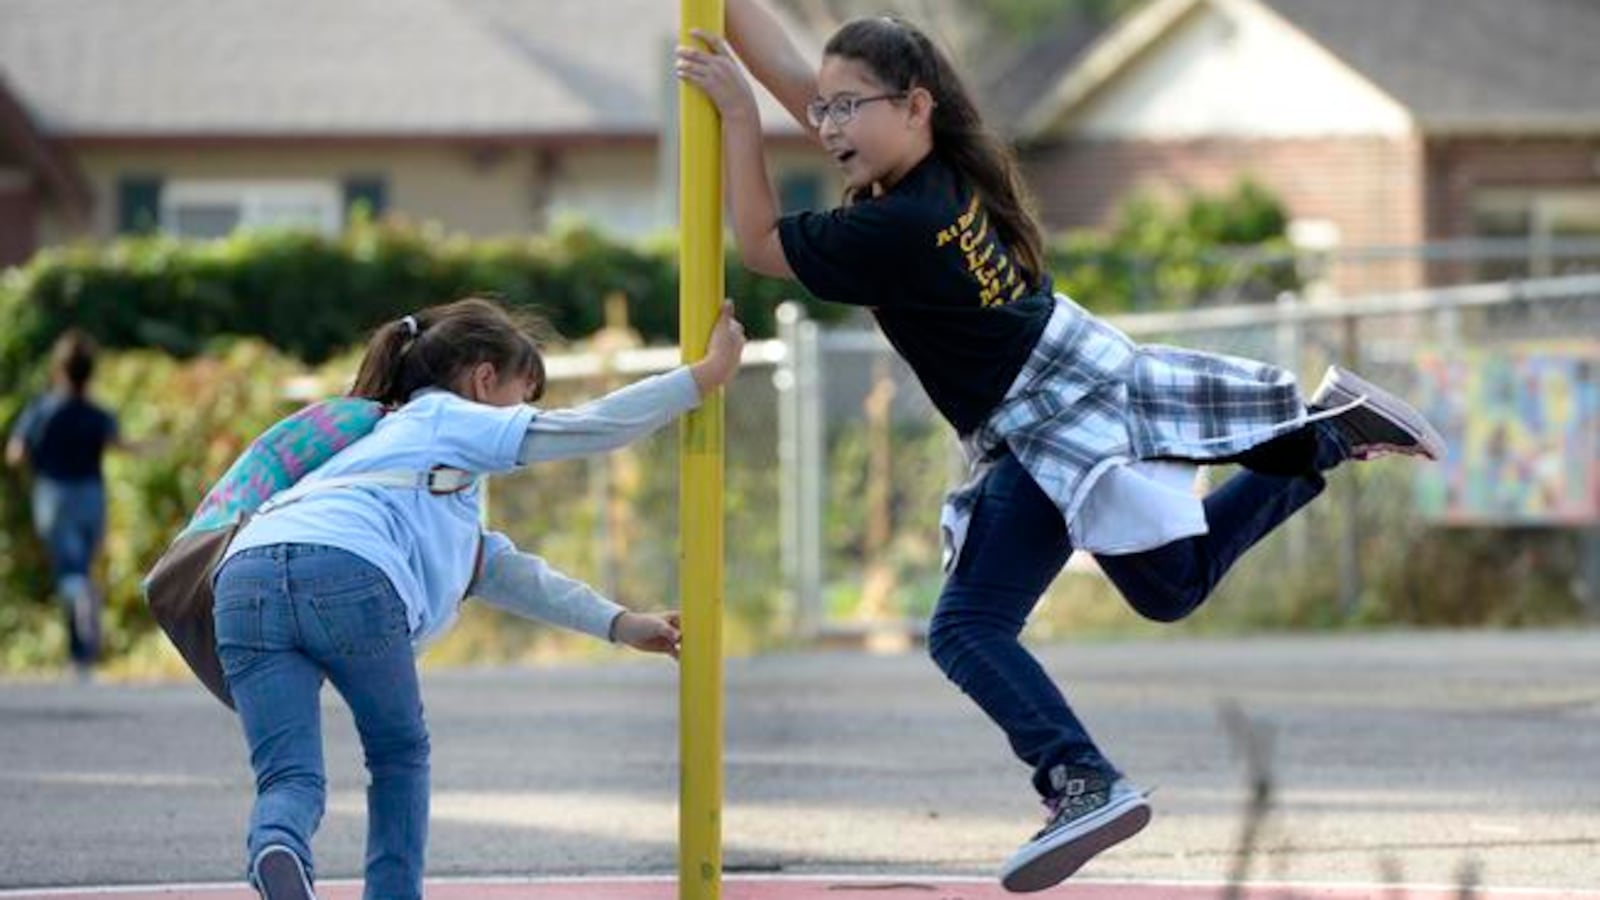 Melisa Piedra-Jara and her sister Jennifer pass time on the Barrett Elementary playground in 2015. Barrett is closing next year and will lose 15 teaching positions.